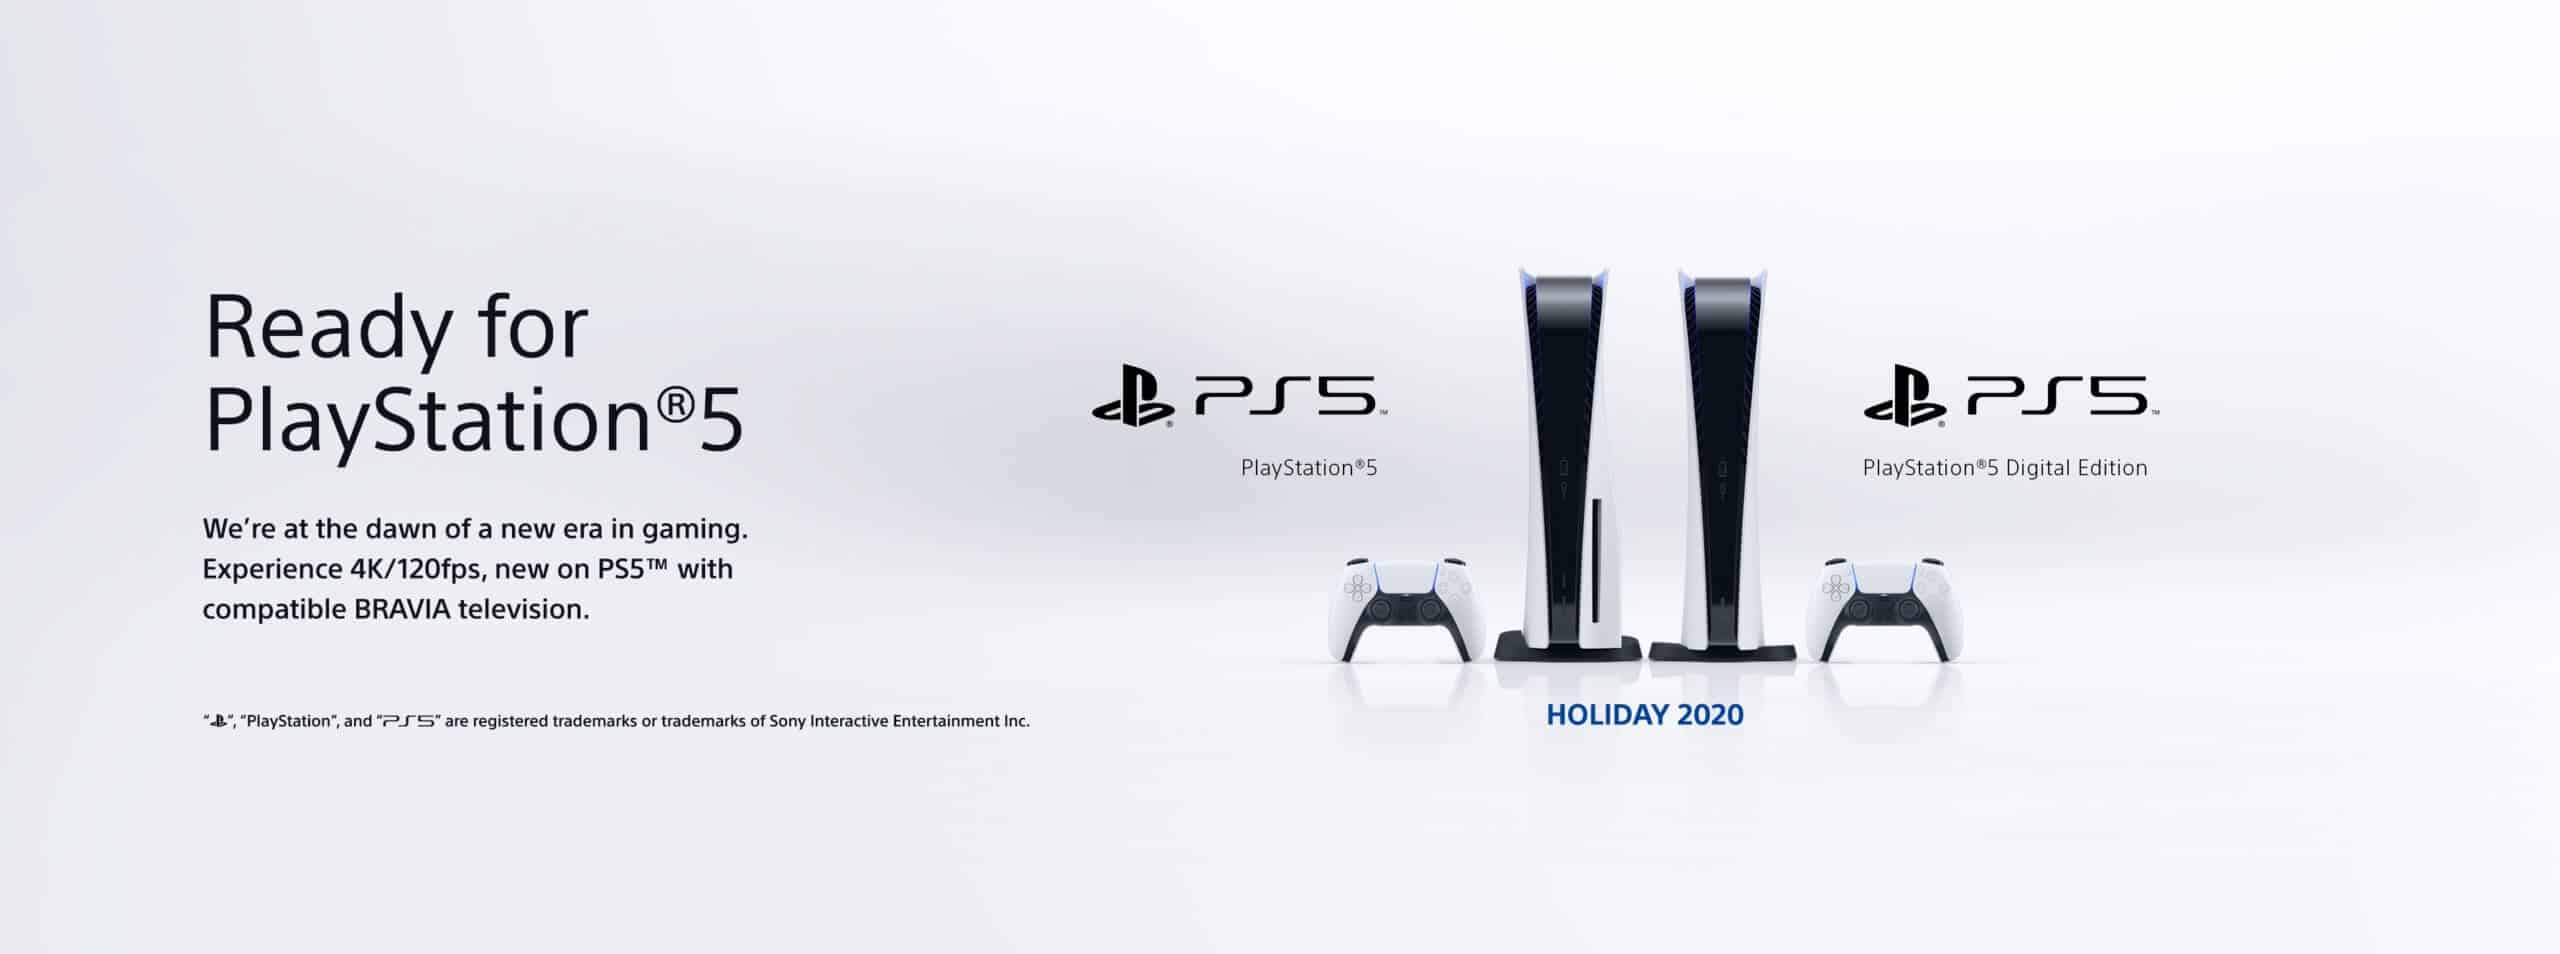 Sony Middle East & Africa Announces ‘Ready for PlayStation 5’ for current BRAVIA TVs